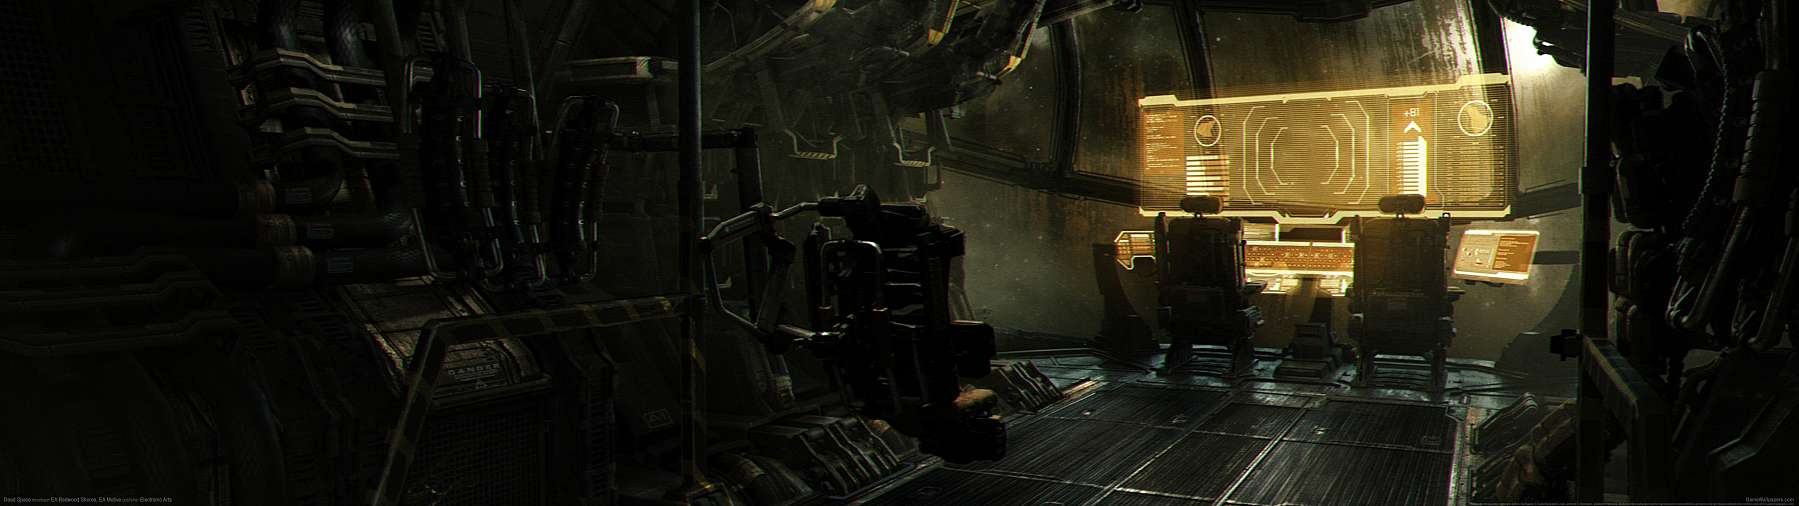 Dead Space superwide wallpaper or background 12